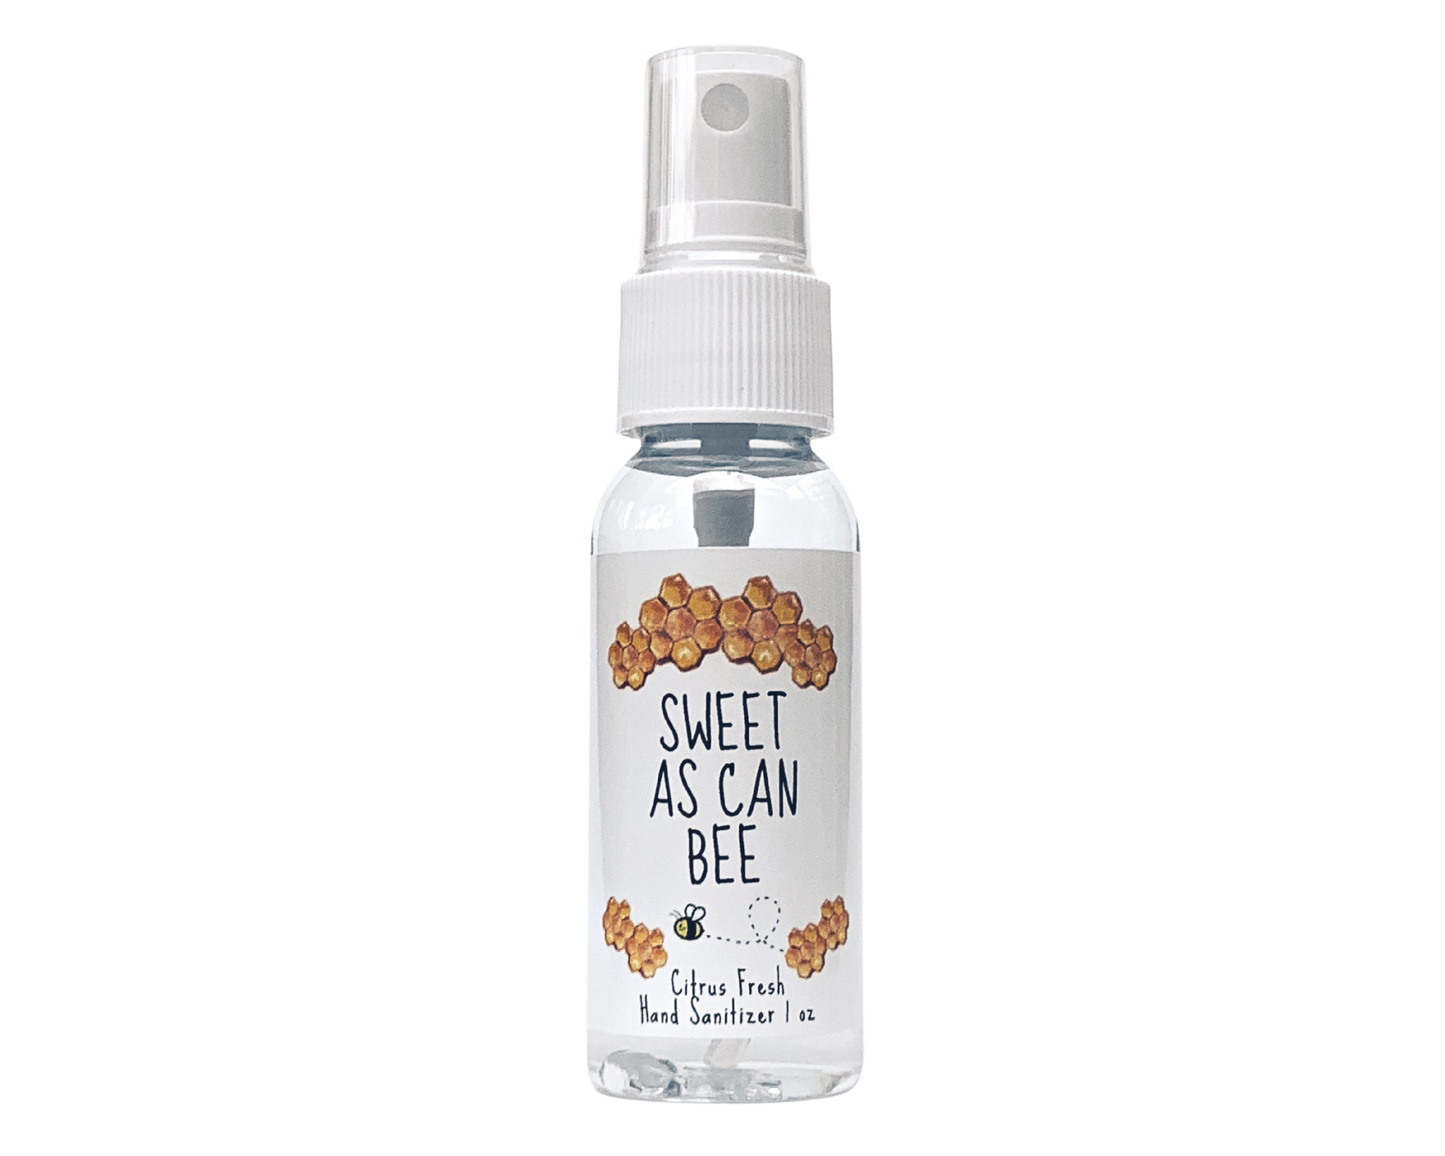 Hand Sanitizer Party Favor - Bumble Bee - Sweet As Can Bee - with Aloe & Essential Oils by Sunshine & Sanitizer